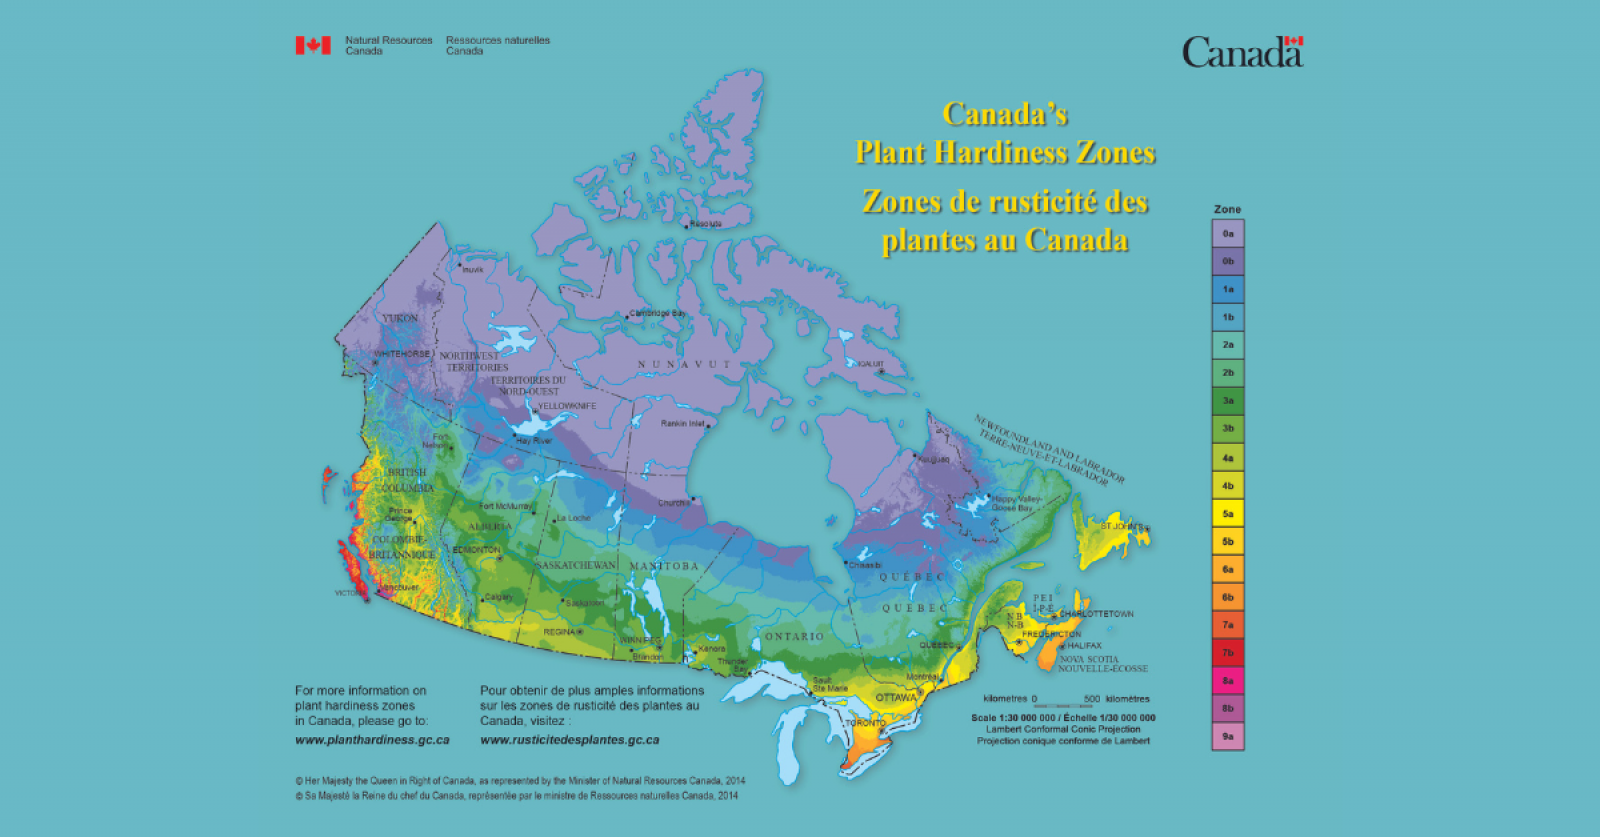 Revised plant hardiness zone coming this year